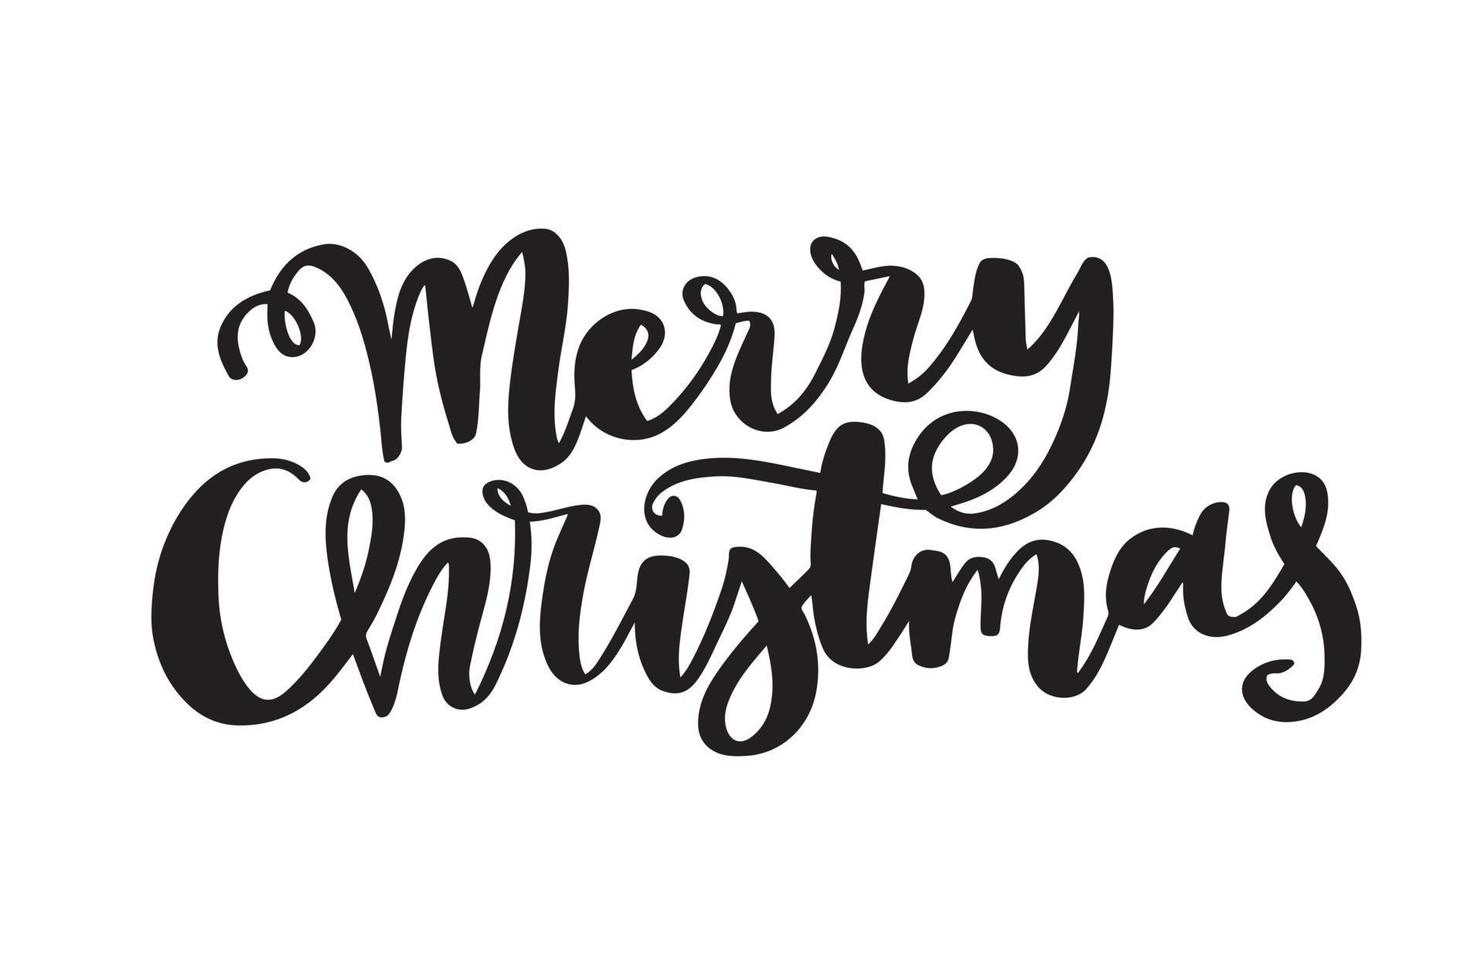 Merry Christmas vector text. Calligraphic Lettering design for greeting card. Creative typography for Holiday card, gift, poster.